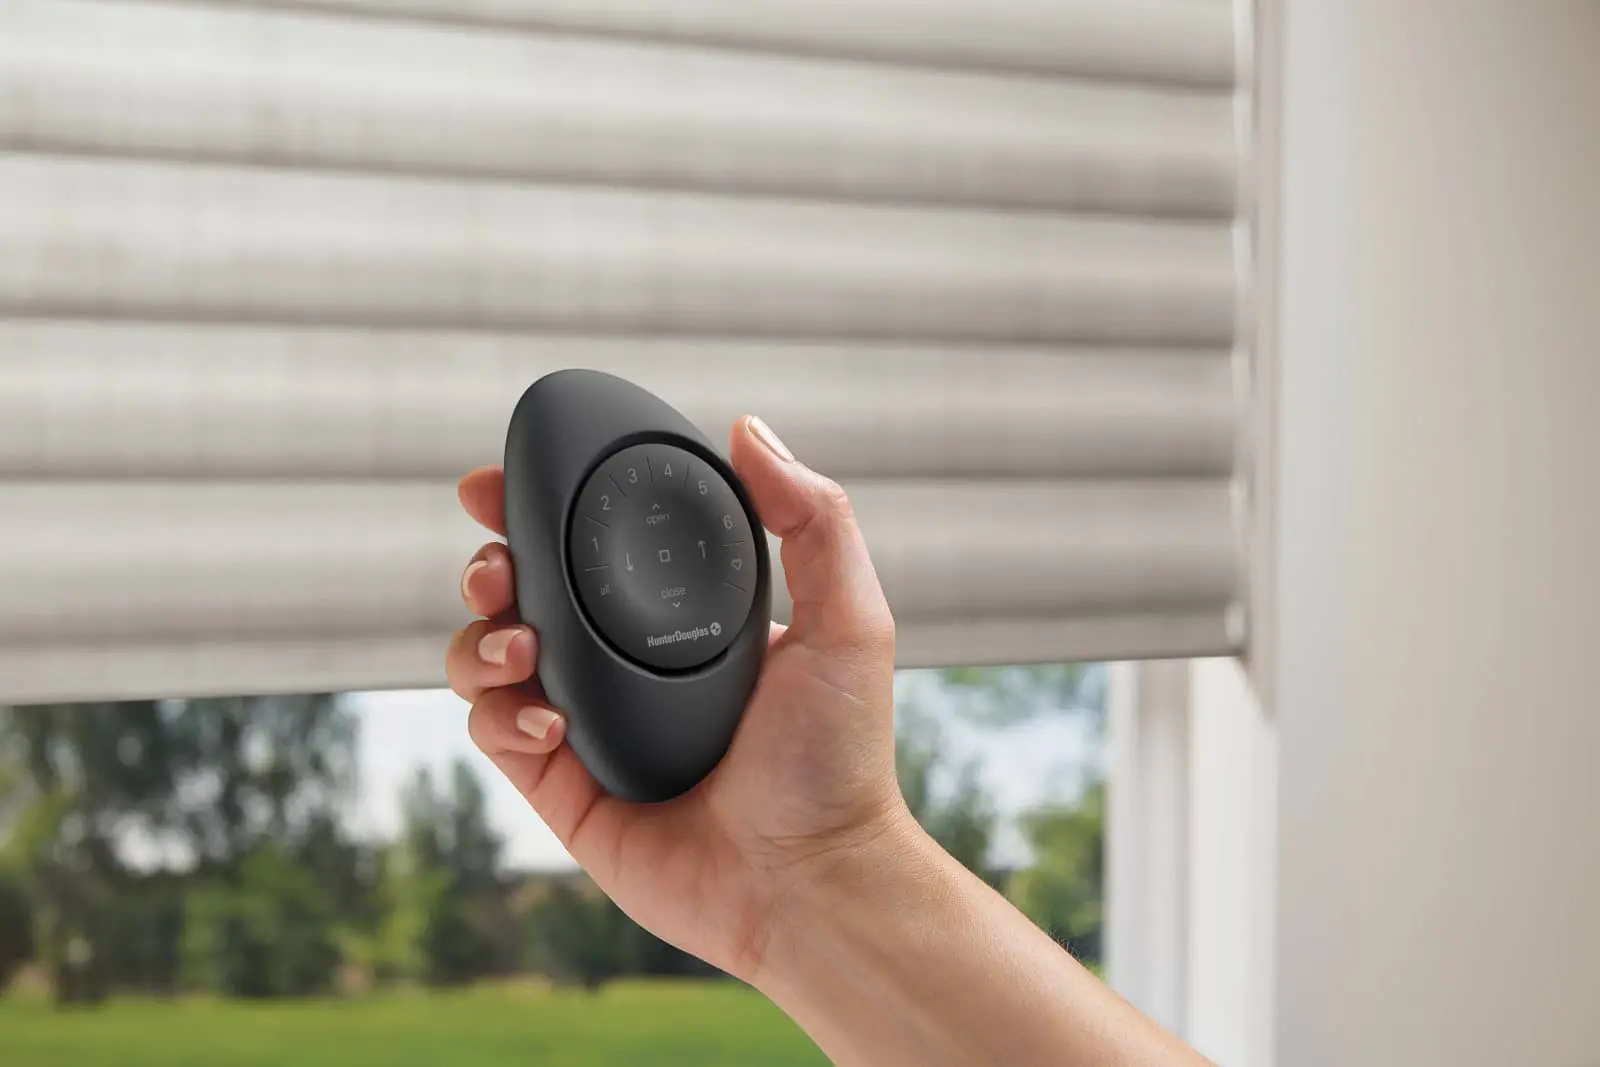 Pebble remote control for blinds and shades